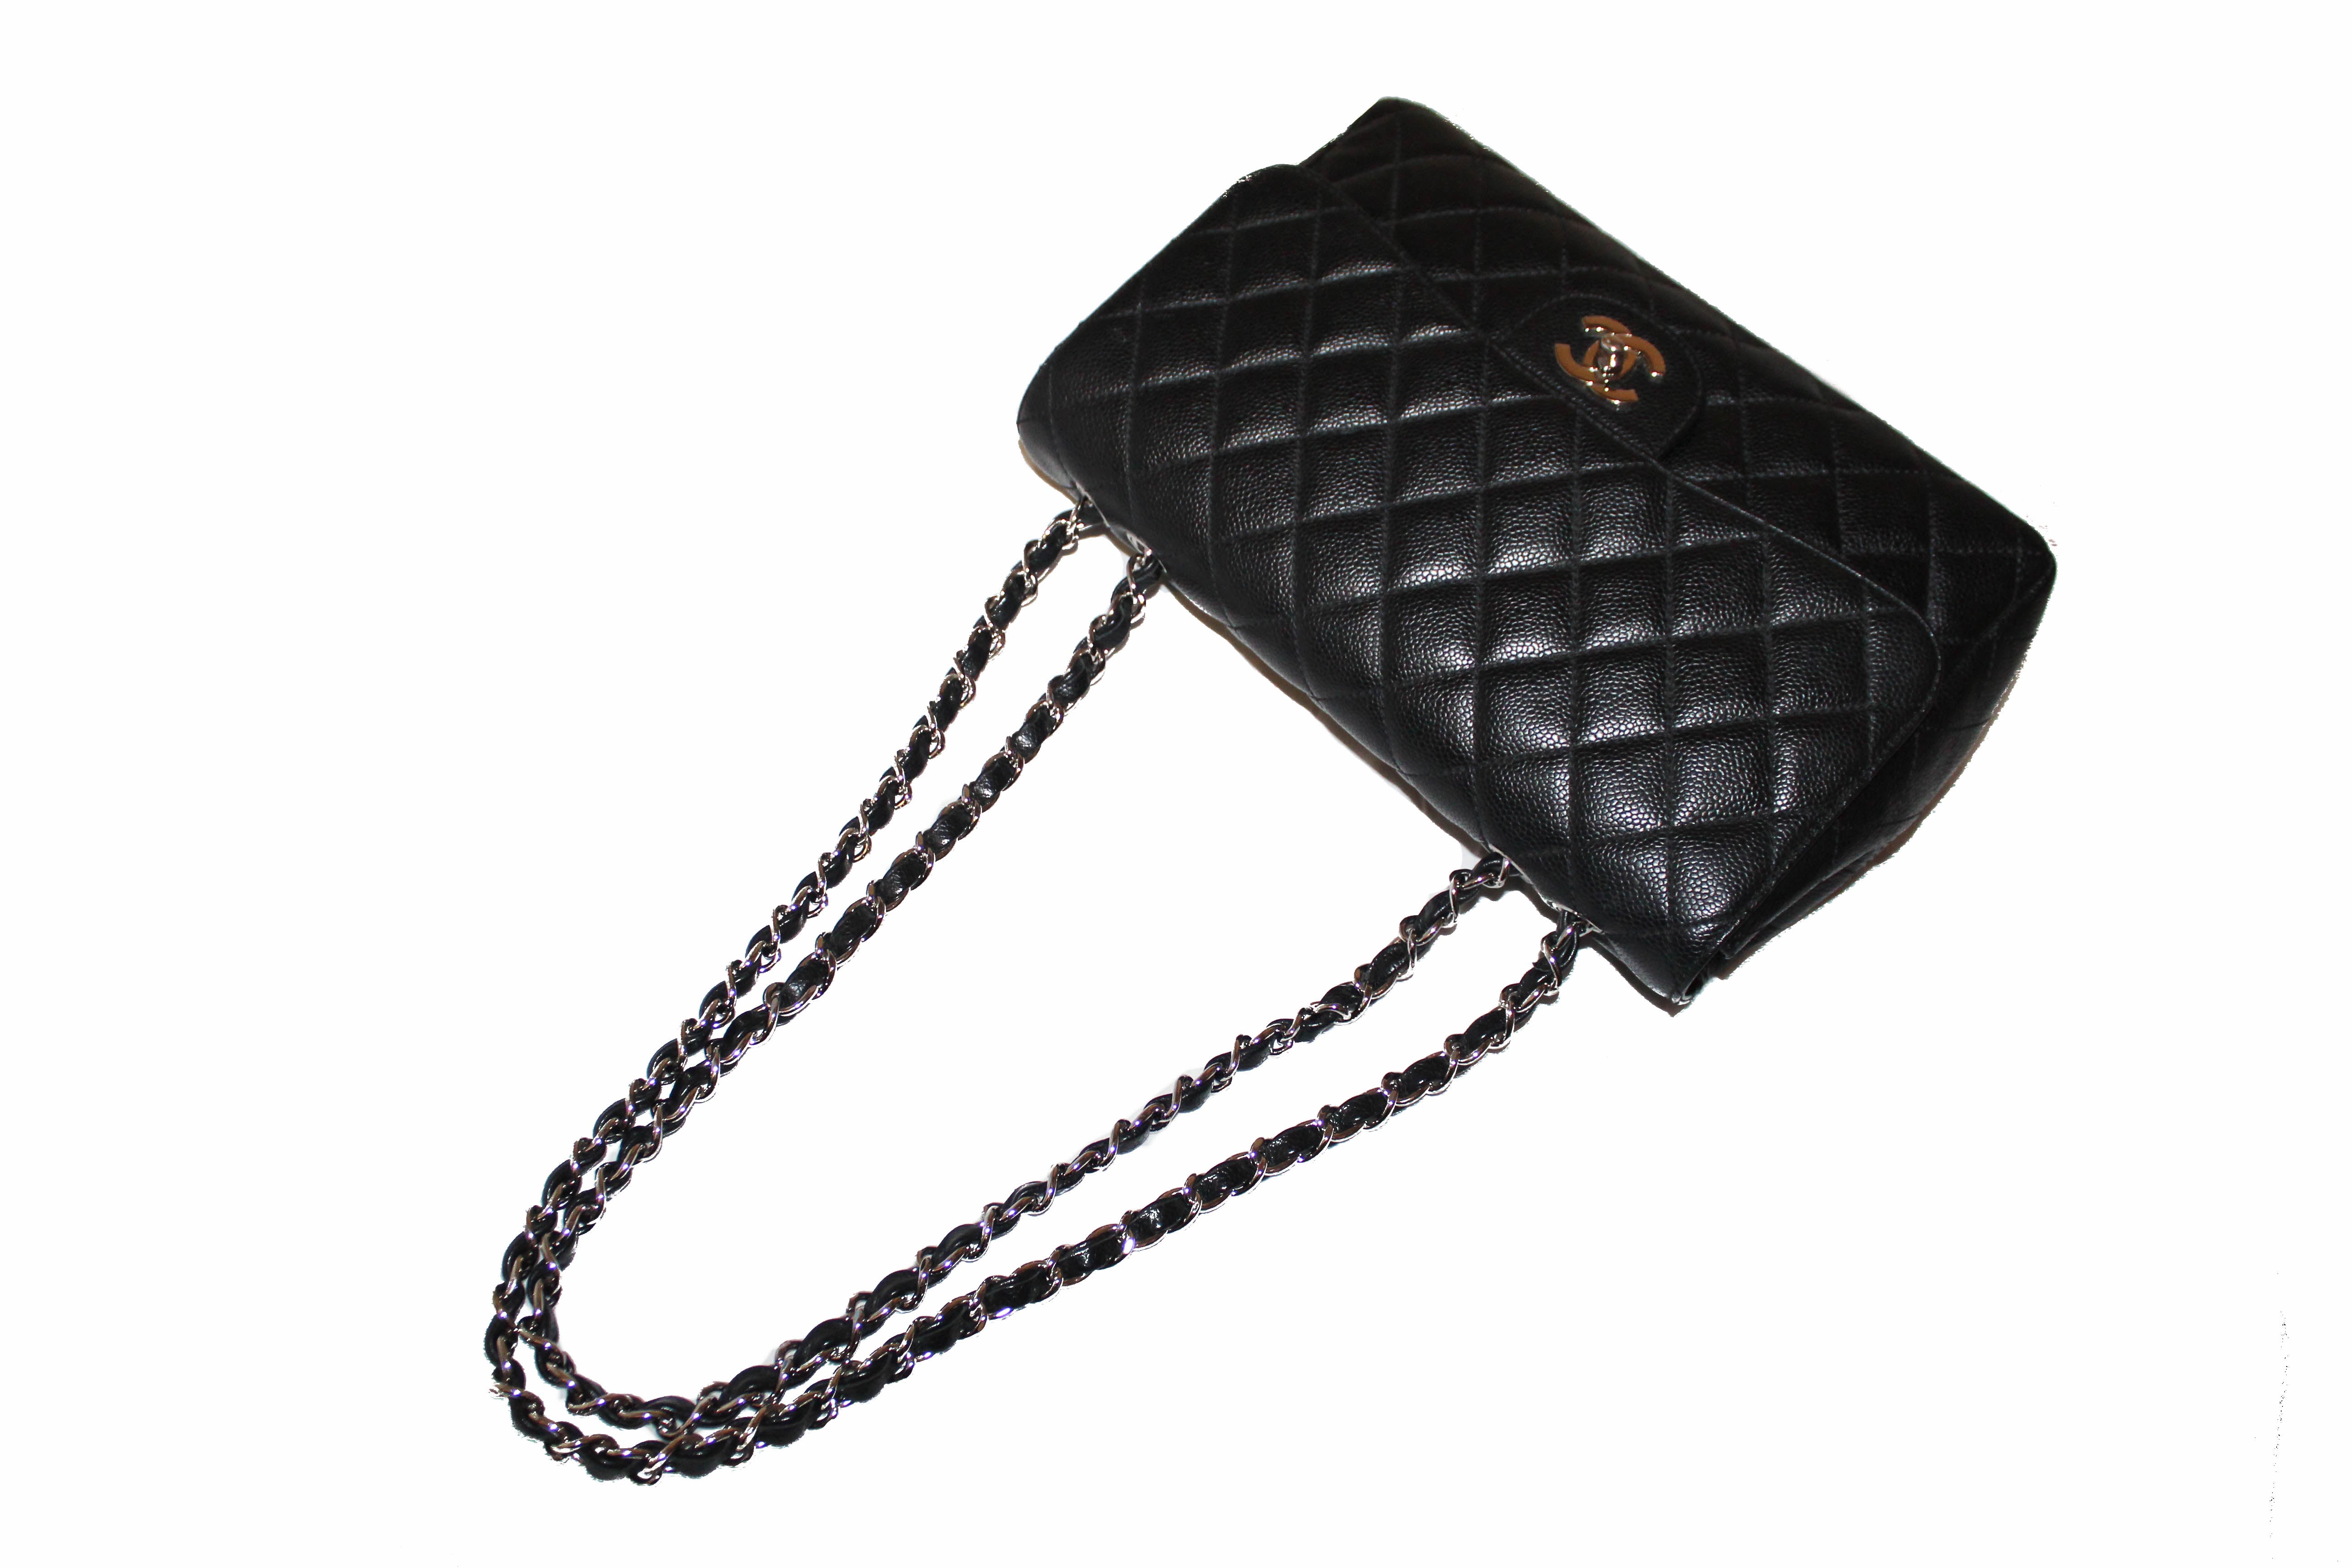 Authentic Chanel Black Quilted Caviar Leather Jumbo Single Flap Bag